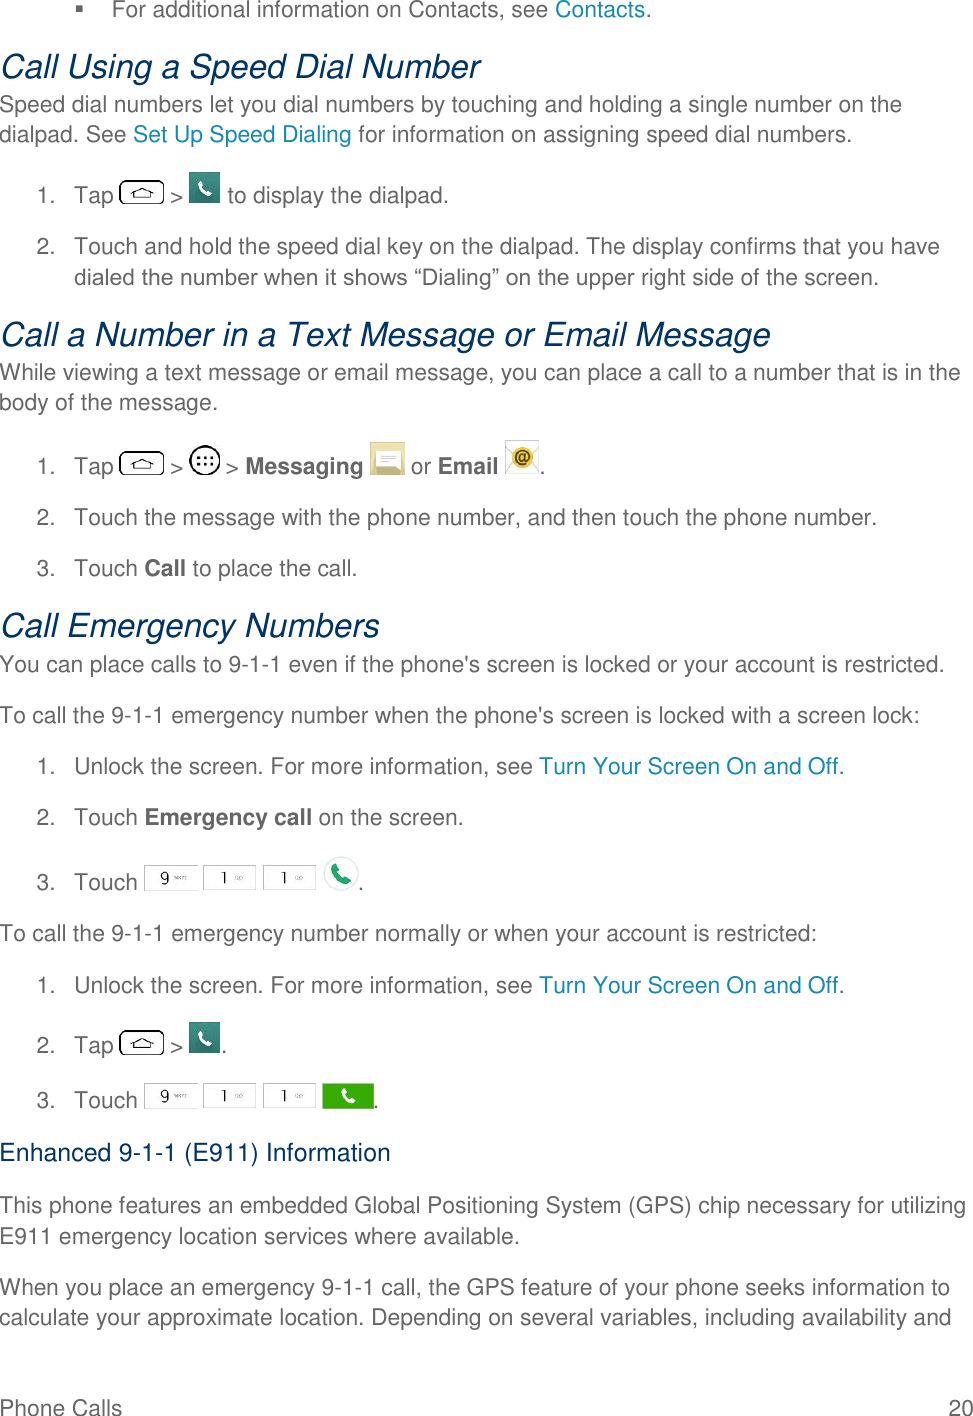 Phone Calls  20   For additional information on Contacts, see Contacts. Call Using a Speed Dial Number Speed dial numbers let you dial numbers by touching and holding a single number on the dialpad. See Set Up Speed Dialing for information on assigning speed dial numbers. 1.  Tap   &gt;   to display the dialpad. 2.  Touch and hold the speed dial key on the dialpad. The display confirms that you have dialed the number when it shows ―Dialing‖ on the upper right side of the screen. Call a Number in a Text Message or Email Message While viewing a text message or email message, you can place a call to a number that is in the body of the message.  1.  Tap   &gt;   &gt; Messaging   or Email  . 2.  Touch the message with the phone number, and then touch the phone number. 3.  Touch Call to place the call. Call Emergency Numbers You can place calls to 9-1-1 even if the phone&apos;s screen is locked or your account is restricted. To call the 9-1-1 emergency number when the phone&apos;s screen is locked with a screen lock: 1.  Unlock the screen. For more information, see Turn Your Screen On and Off. 2.  Touch Emergency call on the screen. 3.  Touch        . To call the 9-1-1 emergency number normally or when your account is restricted: 1.  Unlock the screen. For more information, see Turn Your Screen On and Off. 2.  Tap   &gt;  . 3.  Touch        . Enhanced 9-1-1 (E911) Information This phone features an embedded Global Positioning System (GPS) chip necessary for utilizing E911 emergency location services where available. When you place an emergency 9-1-1 call, the GPS feature of your phone seeks information to calculate your approximate location. Depending on several variables, including availability and 